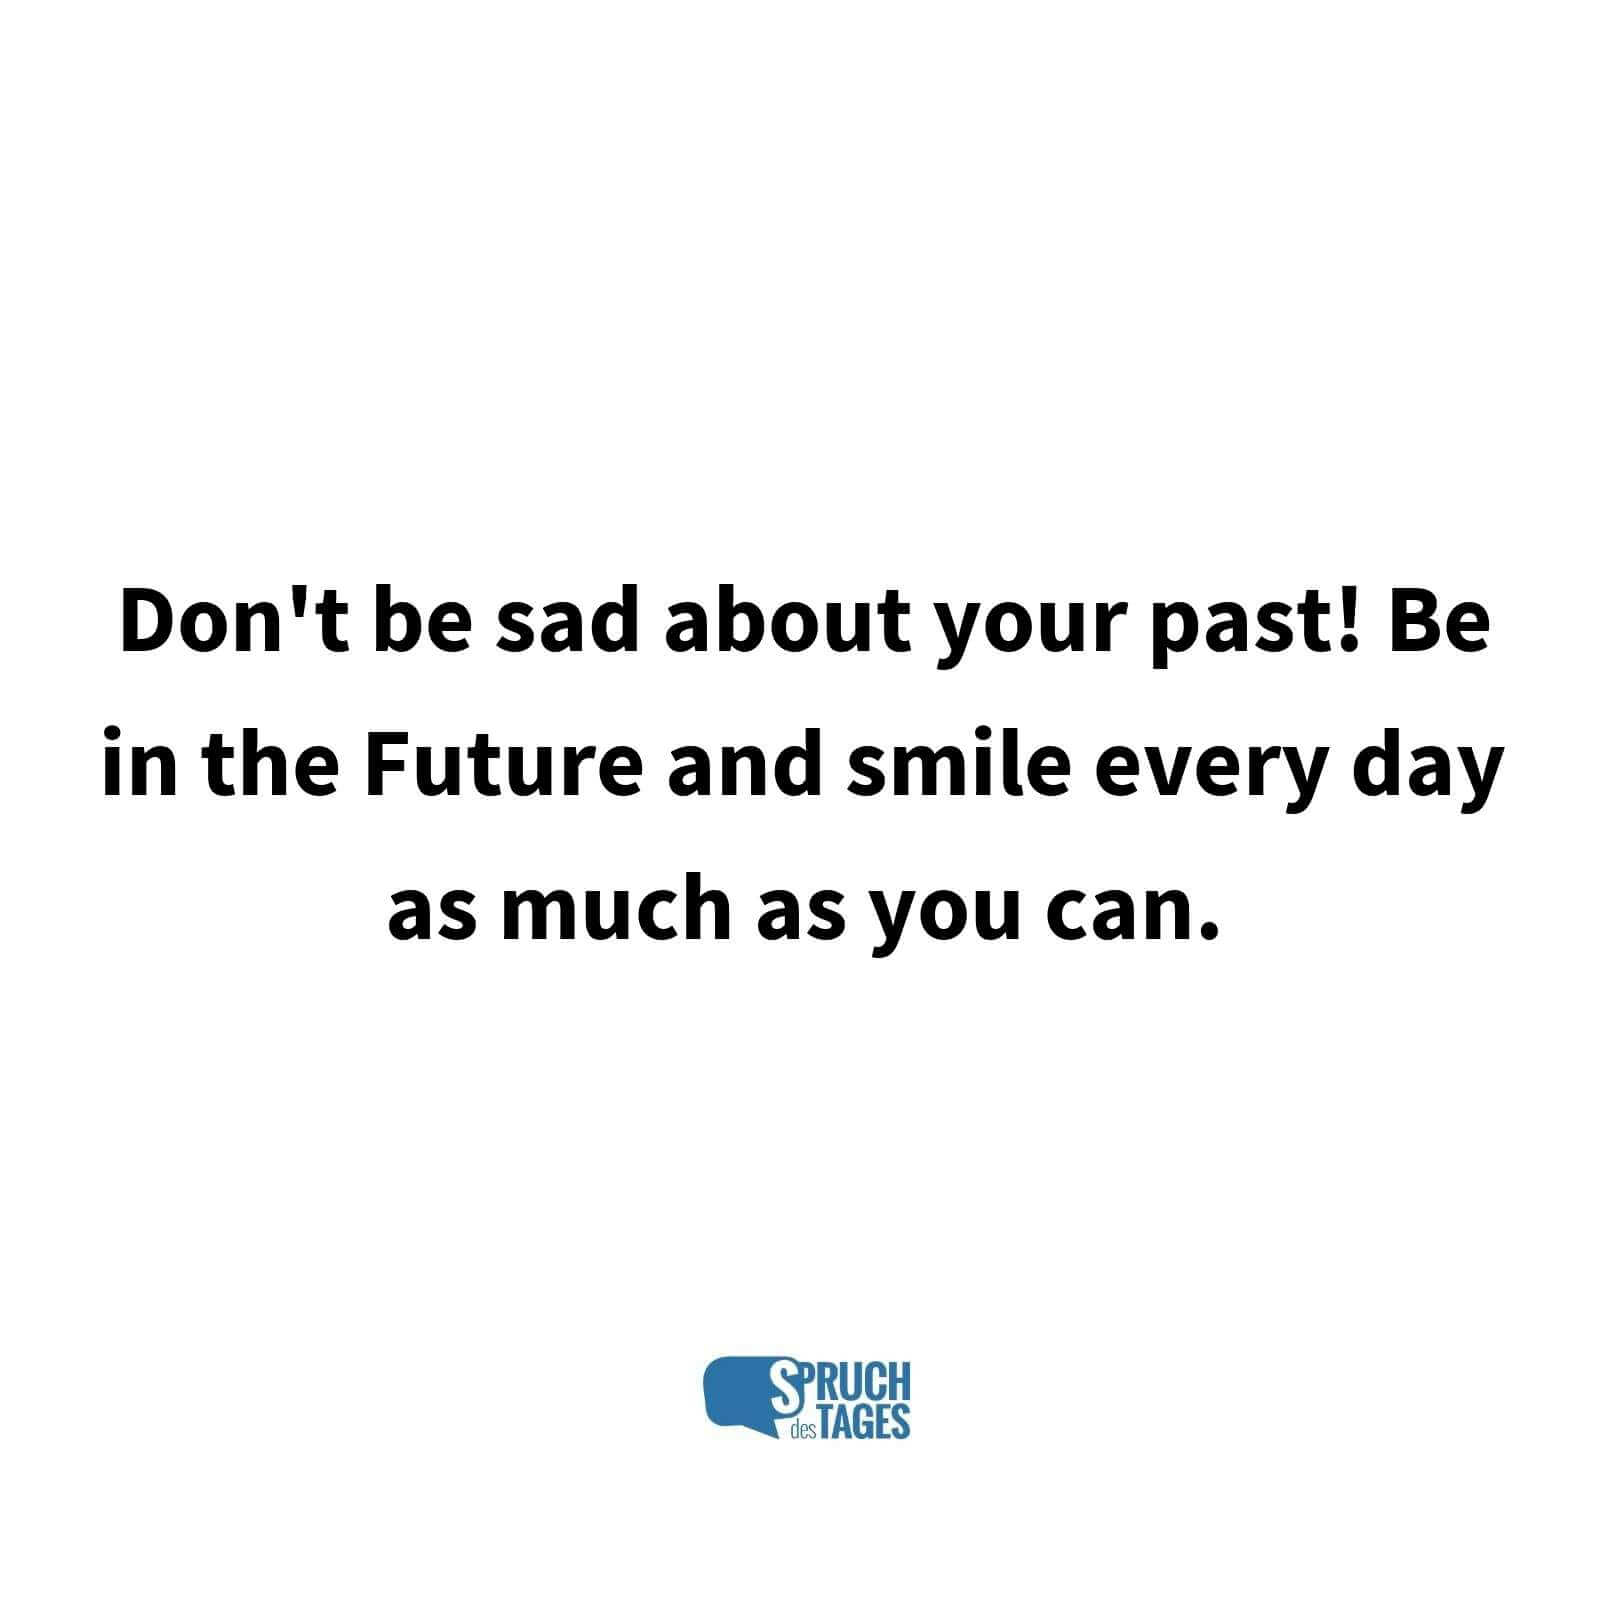 Don’t be sad about your past! Be in the Future and smile every day as much as you can.